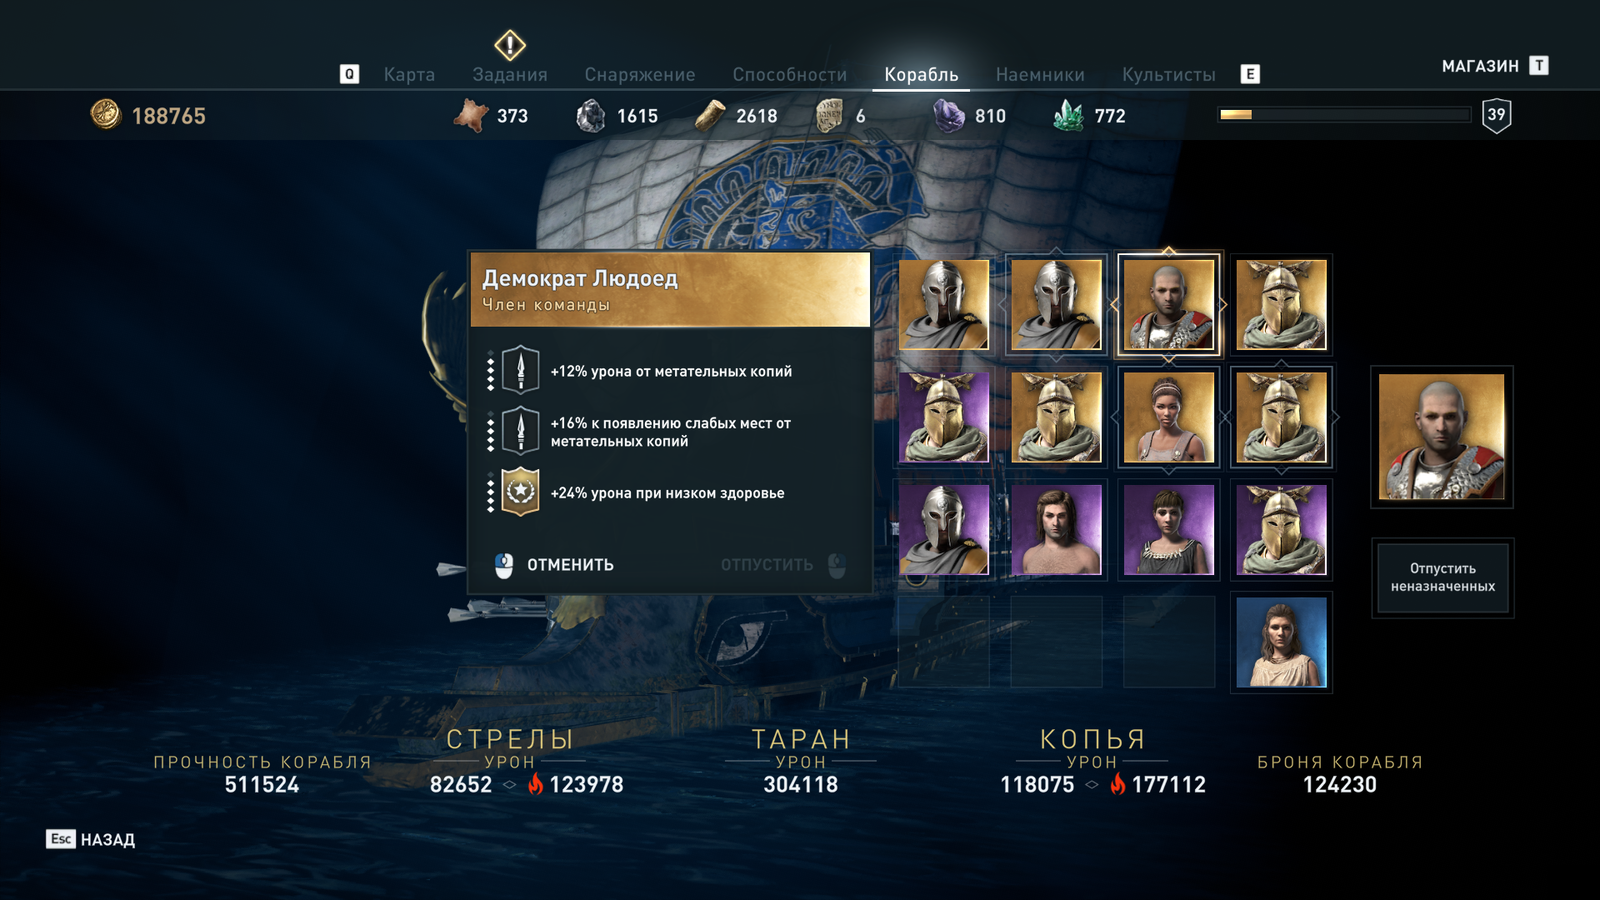 Character name generation in Assassin's Creed Odyssey - My, Assassins creed, Game humor, Computer games, Screenshot, Funny lettering, Democracy